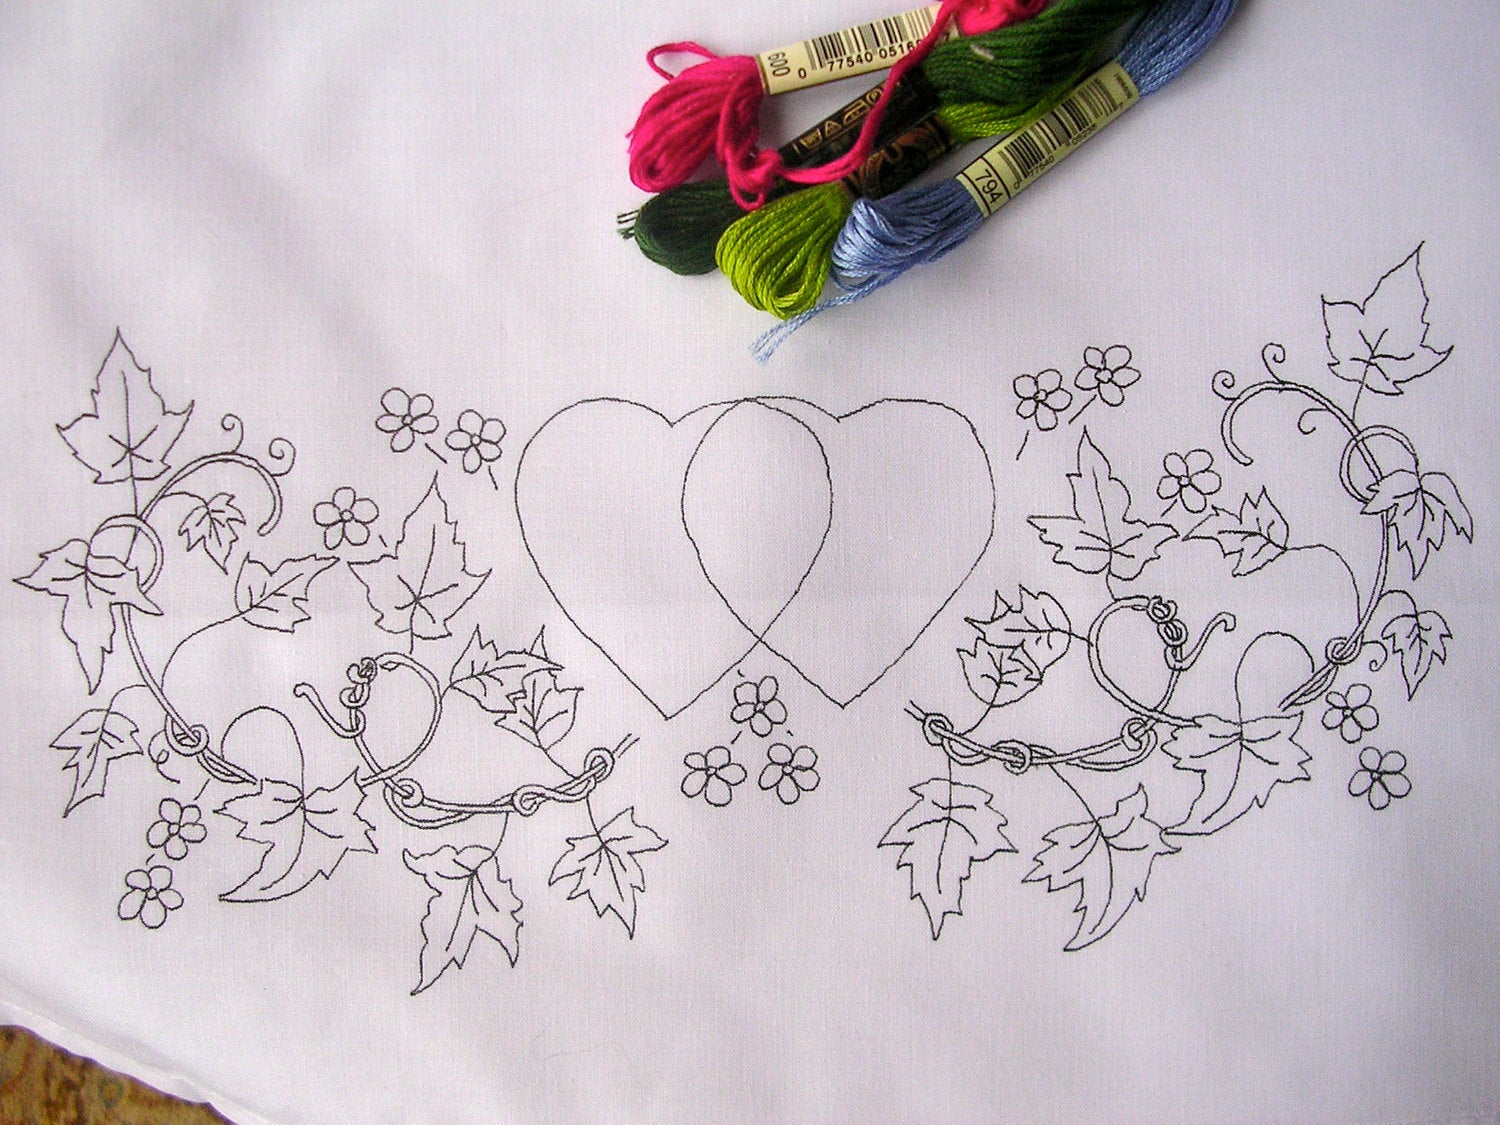 Hand Embroidery Patterns For Pillowcases Ready To Embroider Pillow Cases With A Hearts Flowers Embroidery Design